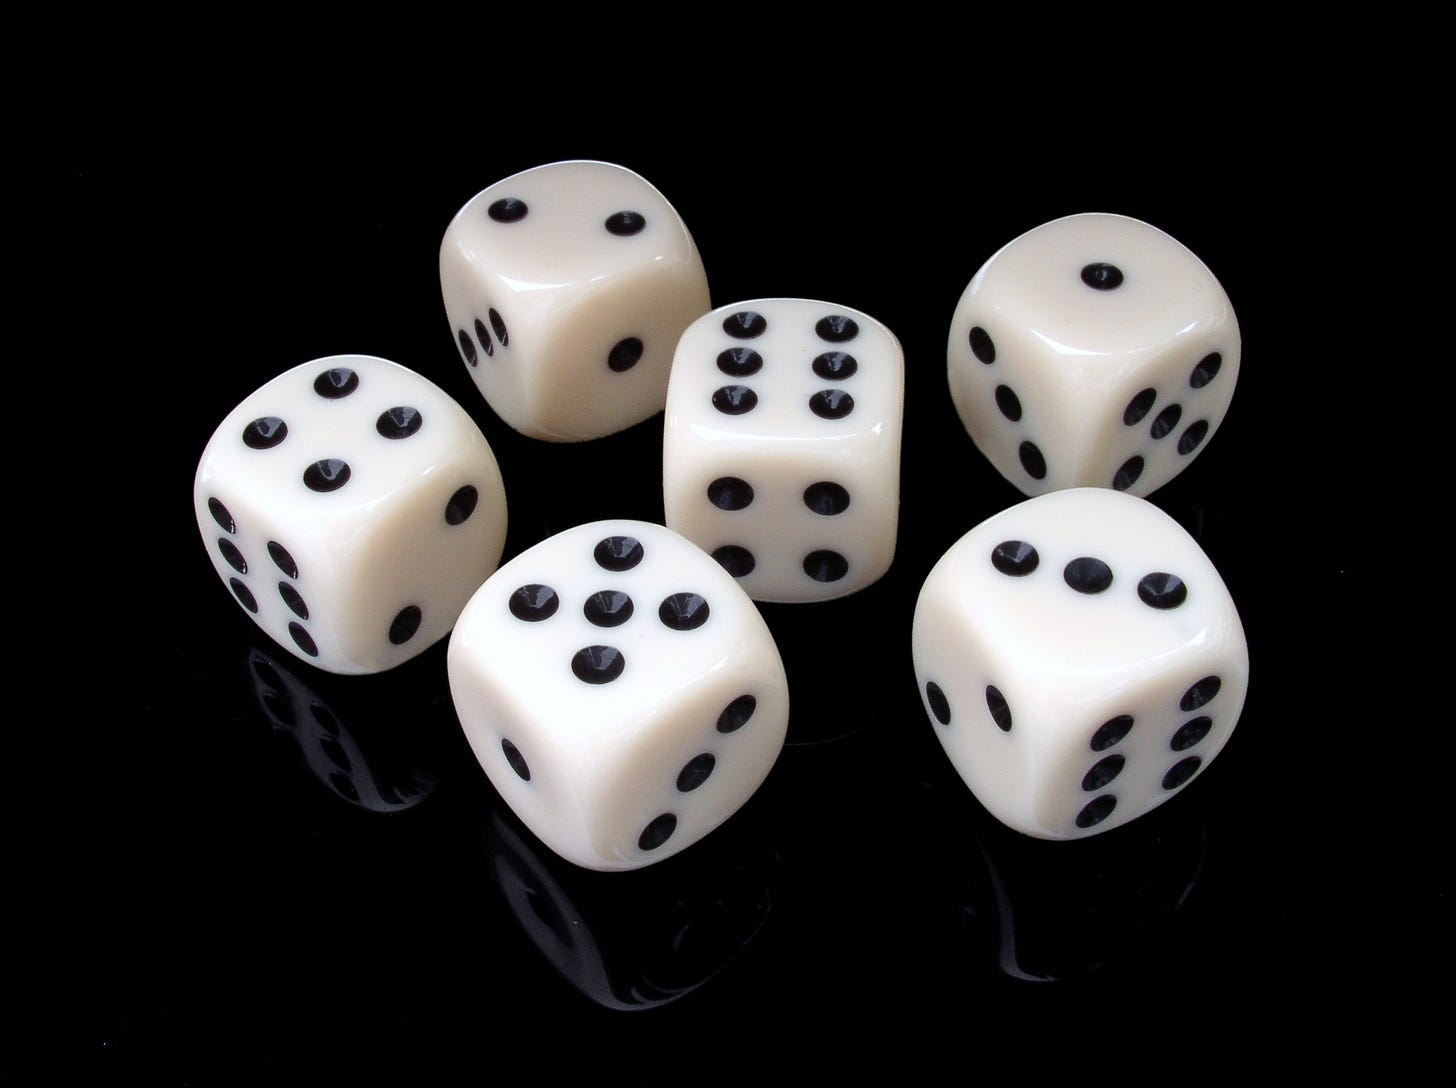 Six white dice on a black flat surface